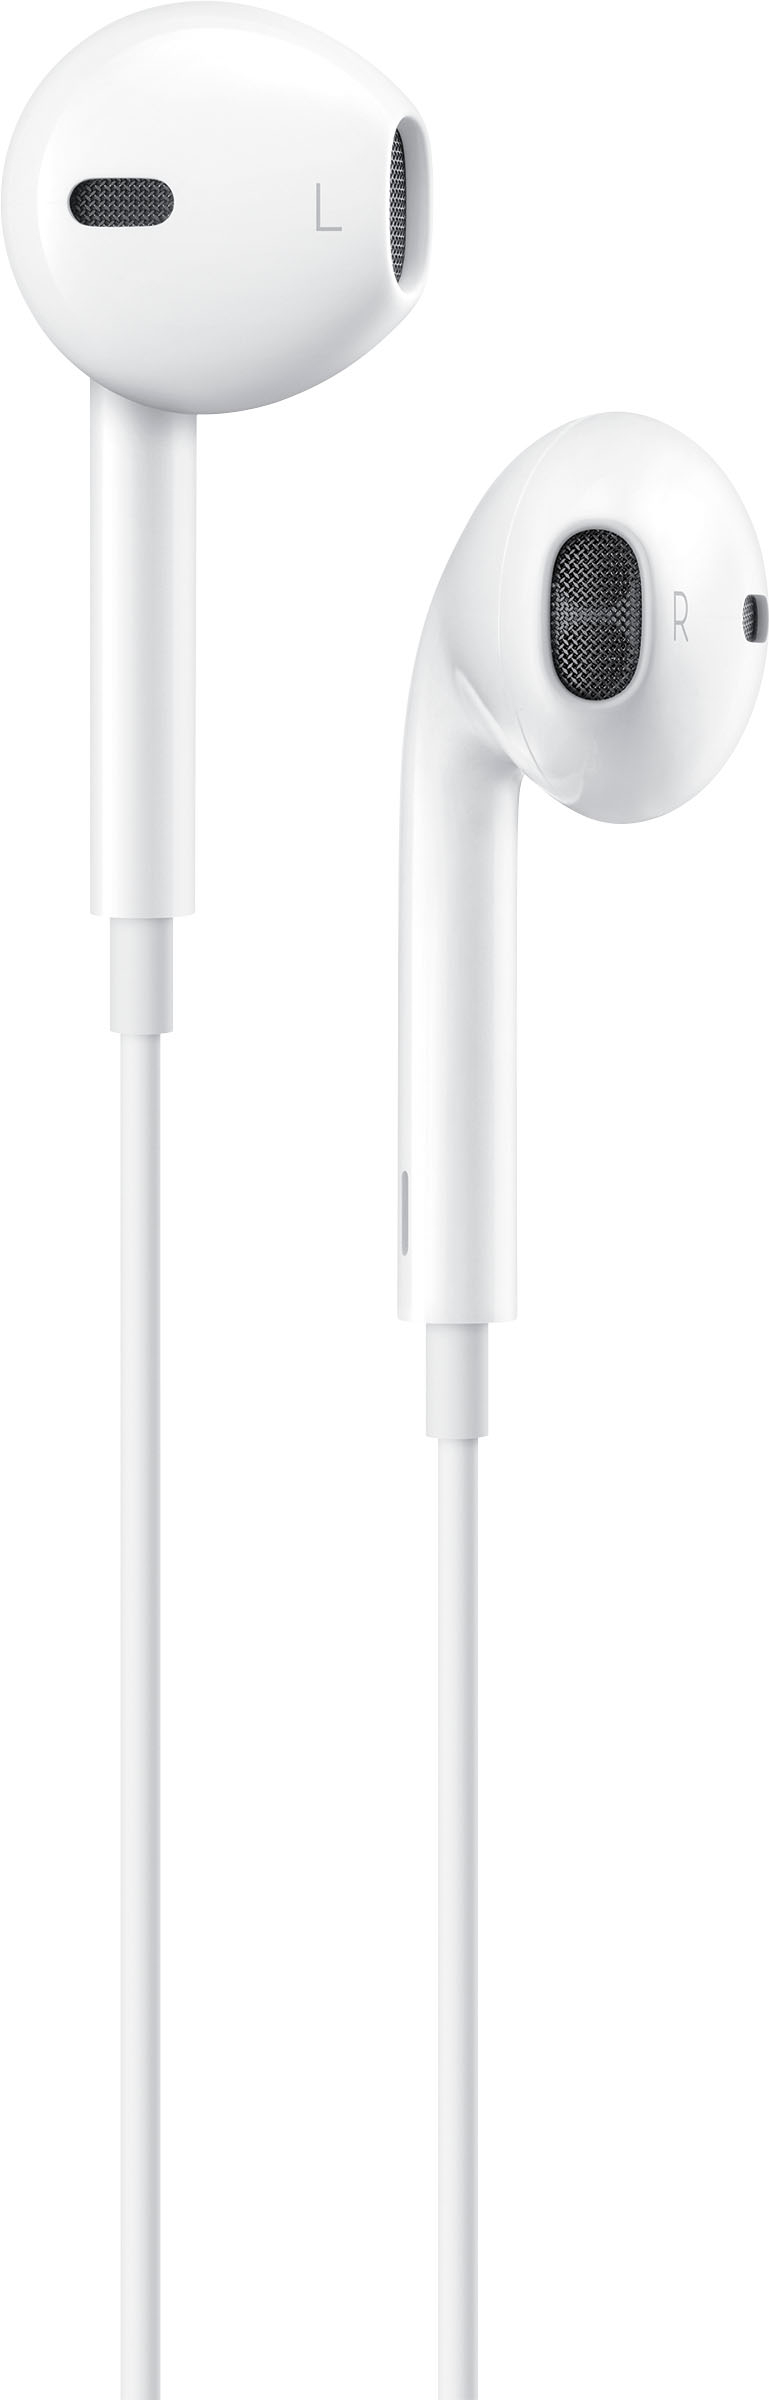 Apple EarPods with Lightning Connector White MMTN2AM/A - Best Buy